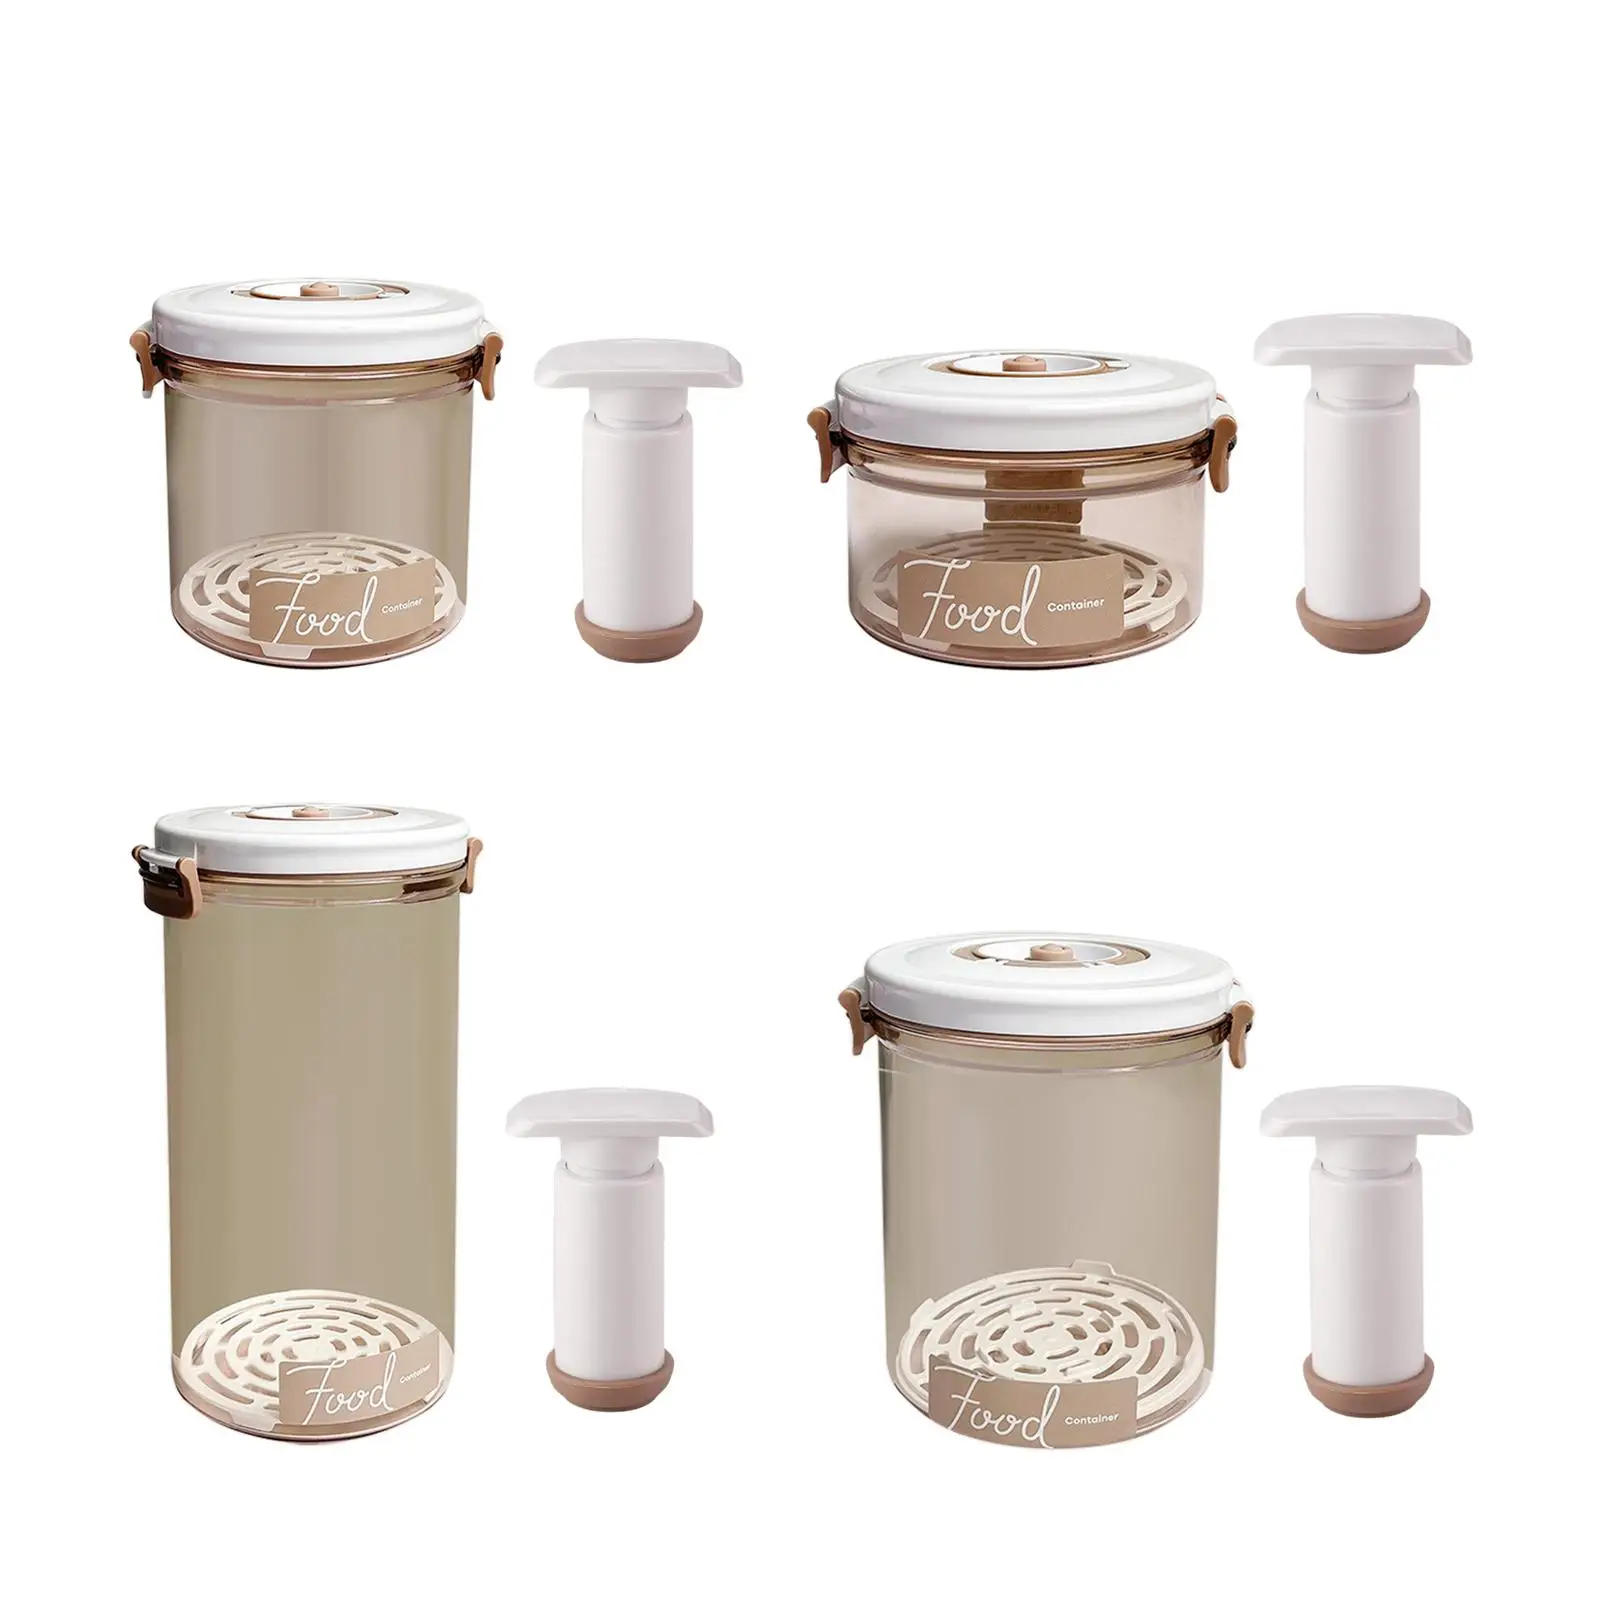 Vacuum Containers for Food Storage Portable Vacuum Sealer Vacuum Seal Food Storage Container with Lid for Marinating